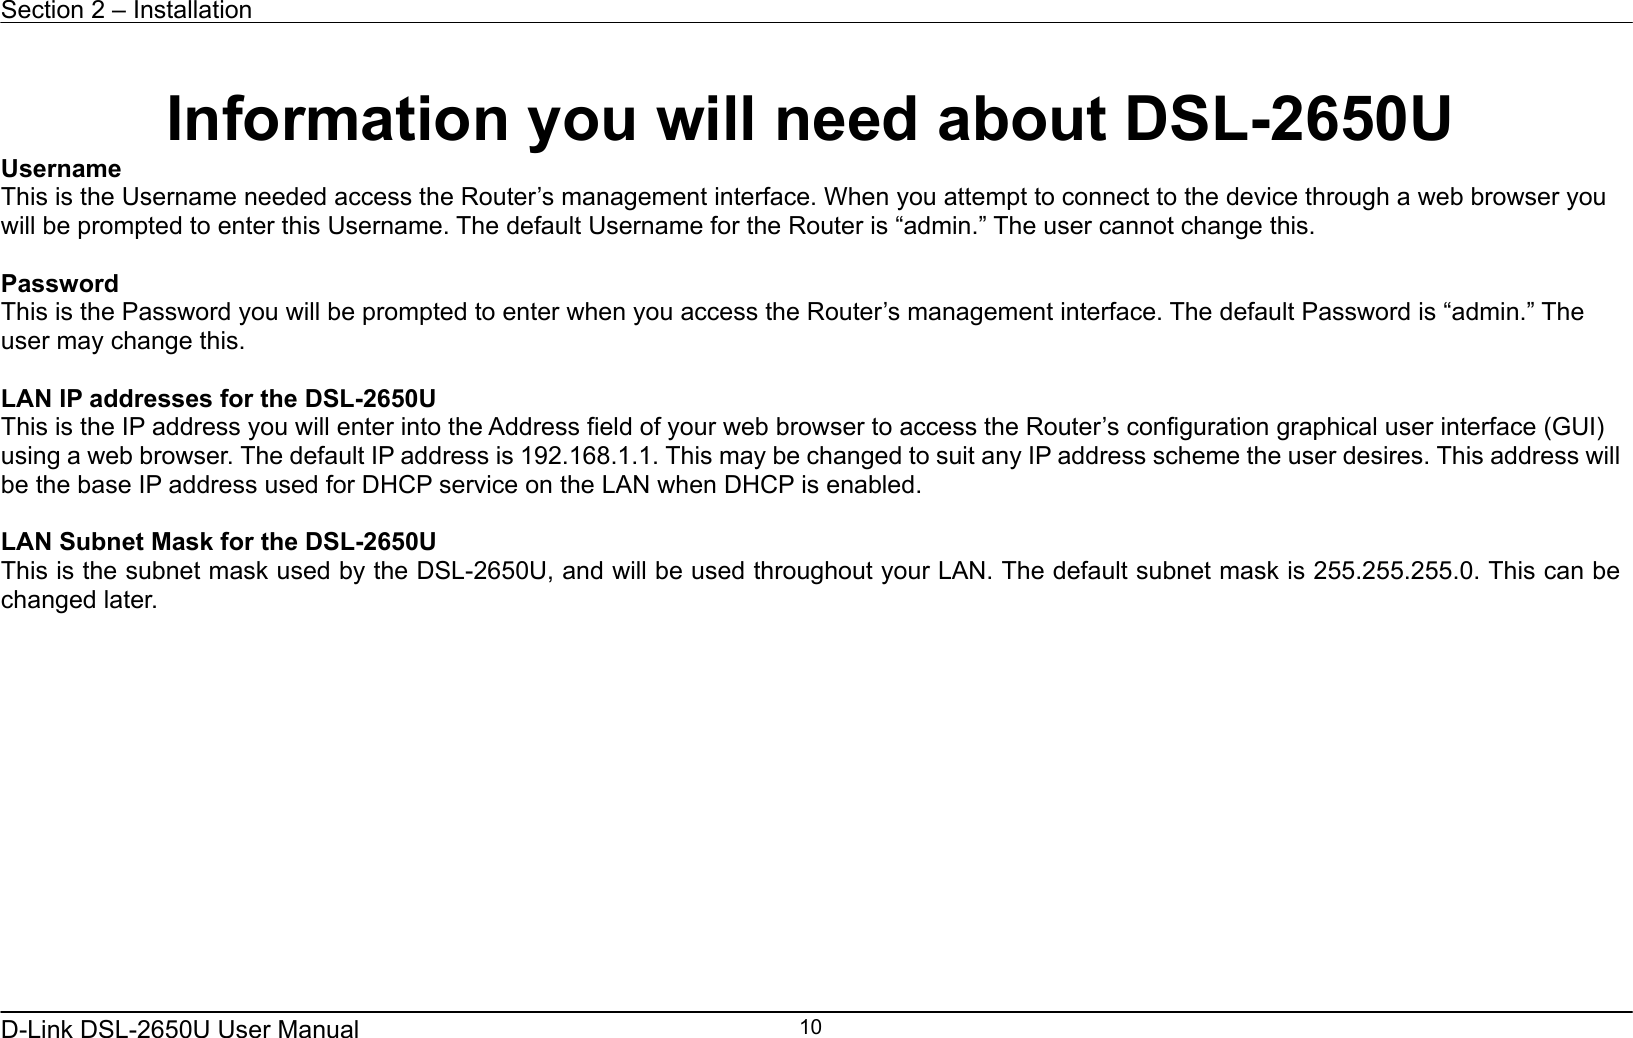 Section 2 – Installation   D-Link DSL-2650U User Manual    10 Information you will need about DSL-2650U Username  This is the Username needed access the Router’s management interface. When you attempt to connect to the device through a web browser you will be prompted to enter this Username. The default Username for the Router is “admin.” The user cannot change this.  Password This is the Password you will be prompted to enter when you access the Router’s management interface. The default Password is “admin.” The user may change this.  LAN IP addresses for the DSL-2650U This is the IP address you will enter into the Address field of your web browser to access the Router’s configuration graphical user interface (GUI) using a web browser. The default IP address is 192.168.1.1. This may be changed to suit any IP address scheme the user desires. This address will be the base IP address used for DHCP service on the LAN when DHCP is enabled.  LAN Subnet Mask for the DSL-2650U This is the subnet mask used by the DSL-2650U, and will be used throughout your LAN. The default subnet mask is 255.255.255.0. This can be changed later.   